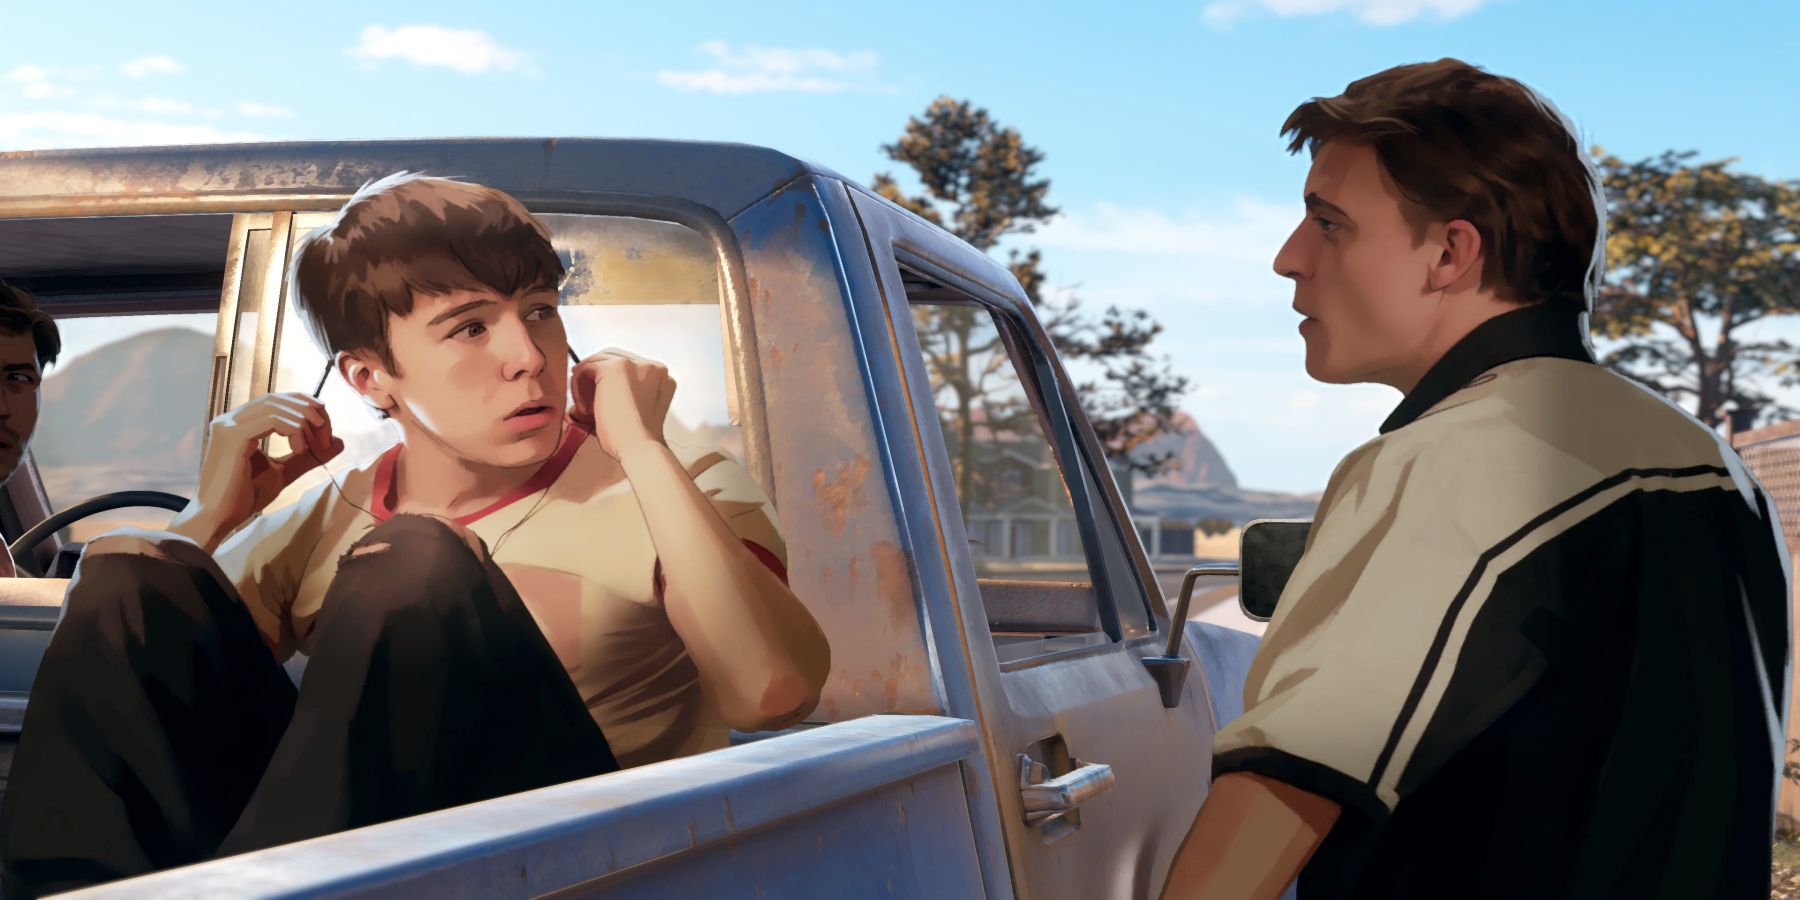 Two characters talk in a pick-up truck